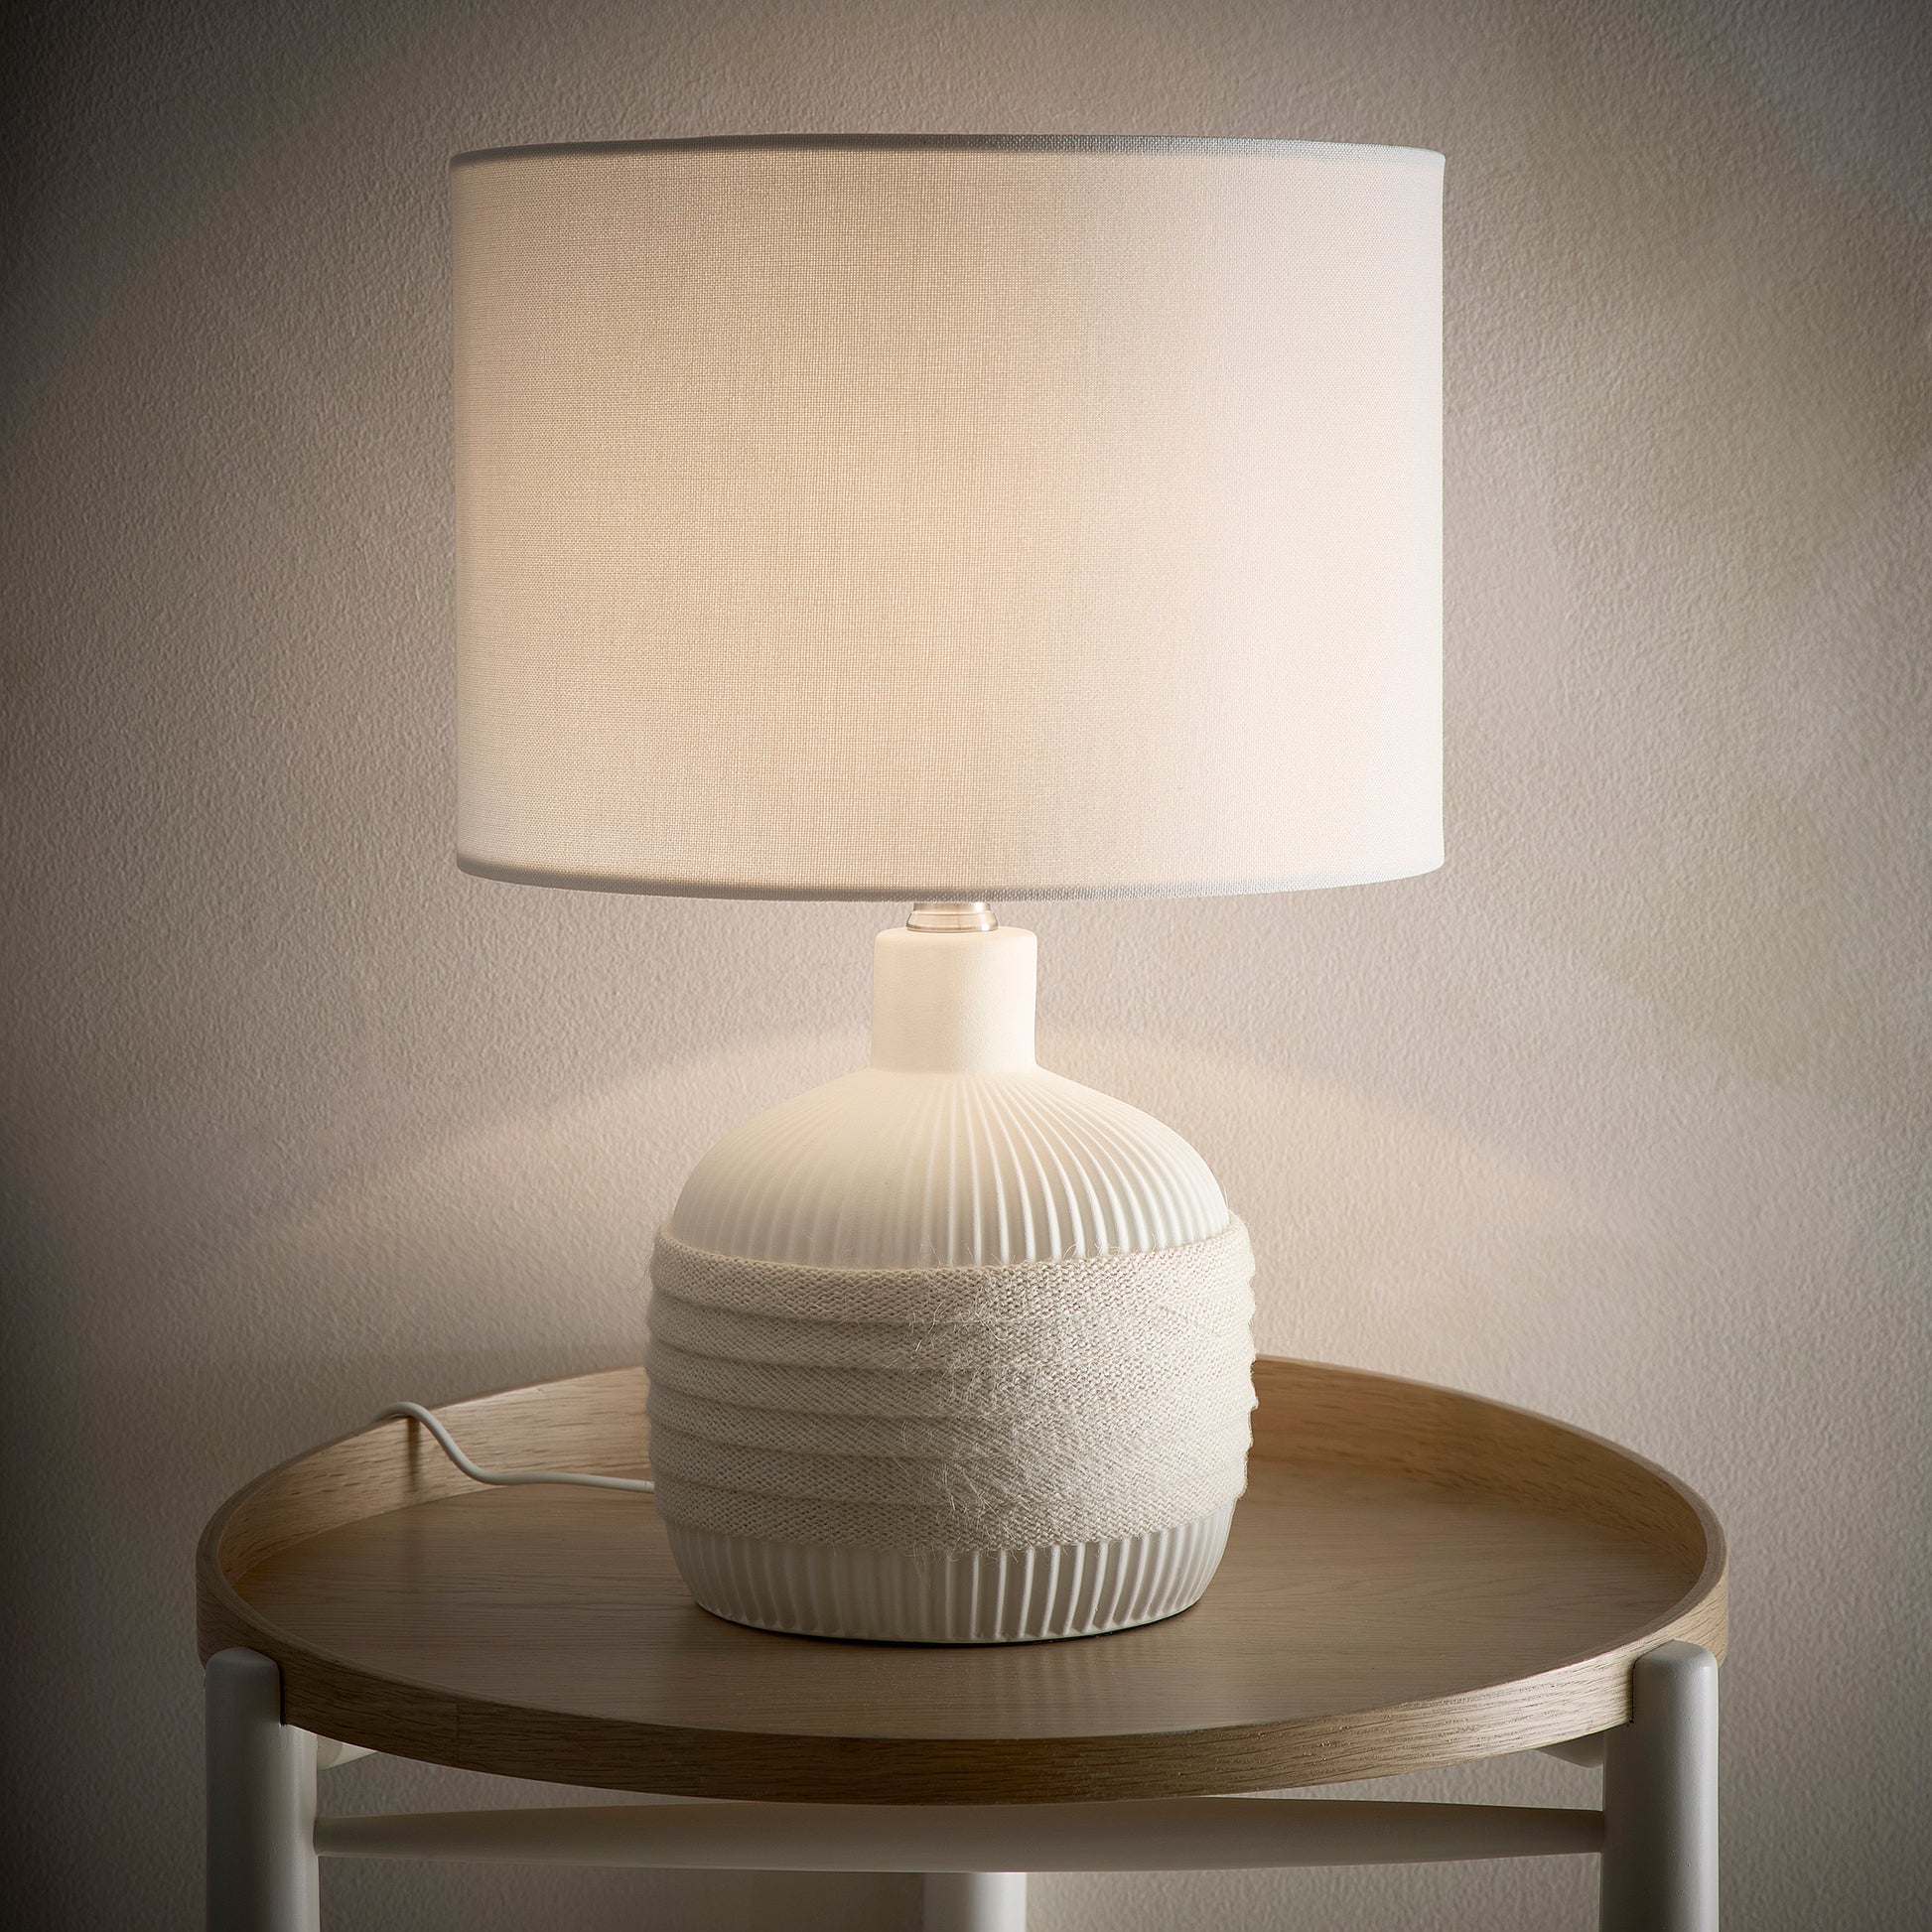 Stunning Ceramic Table lamp with a natural Rope Design Base and a Natural Linen Drum shade